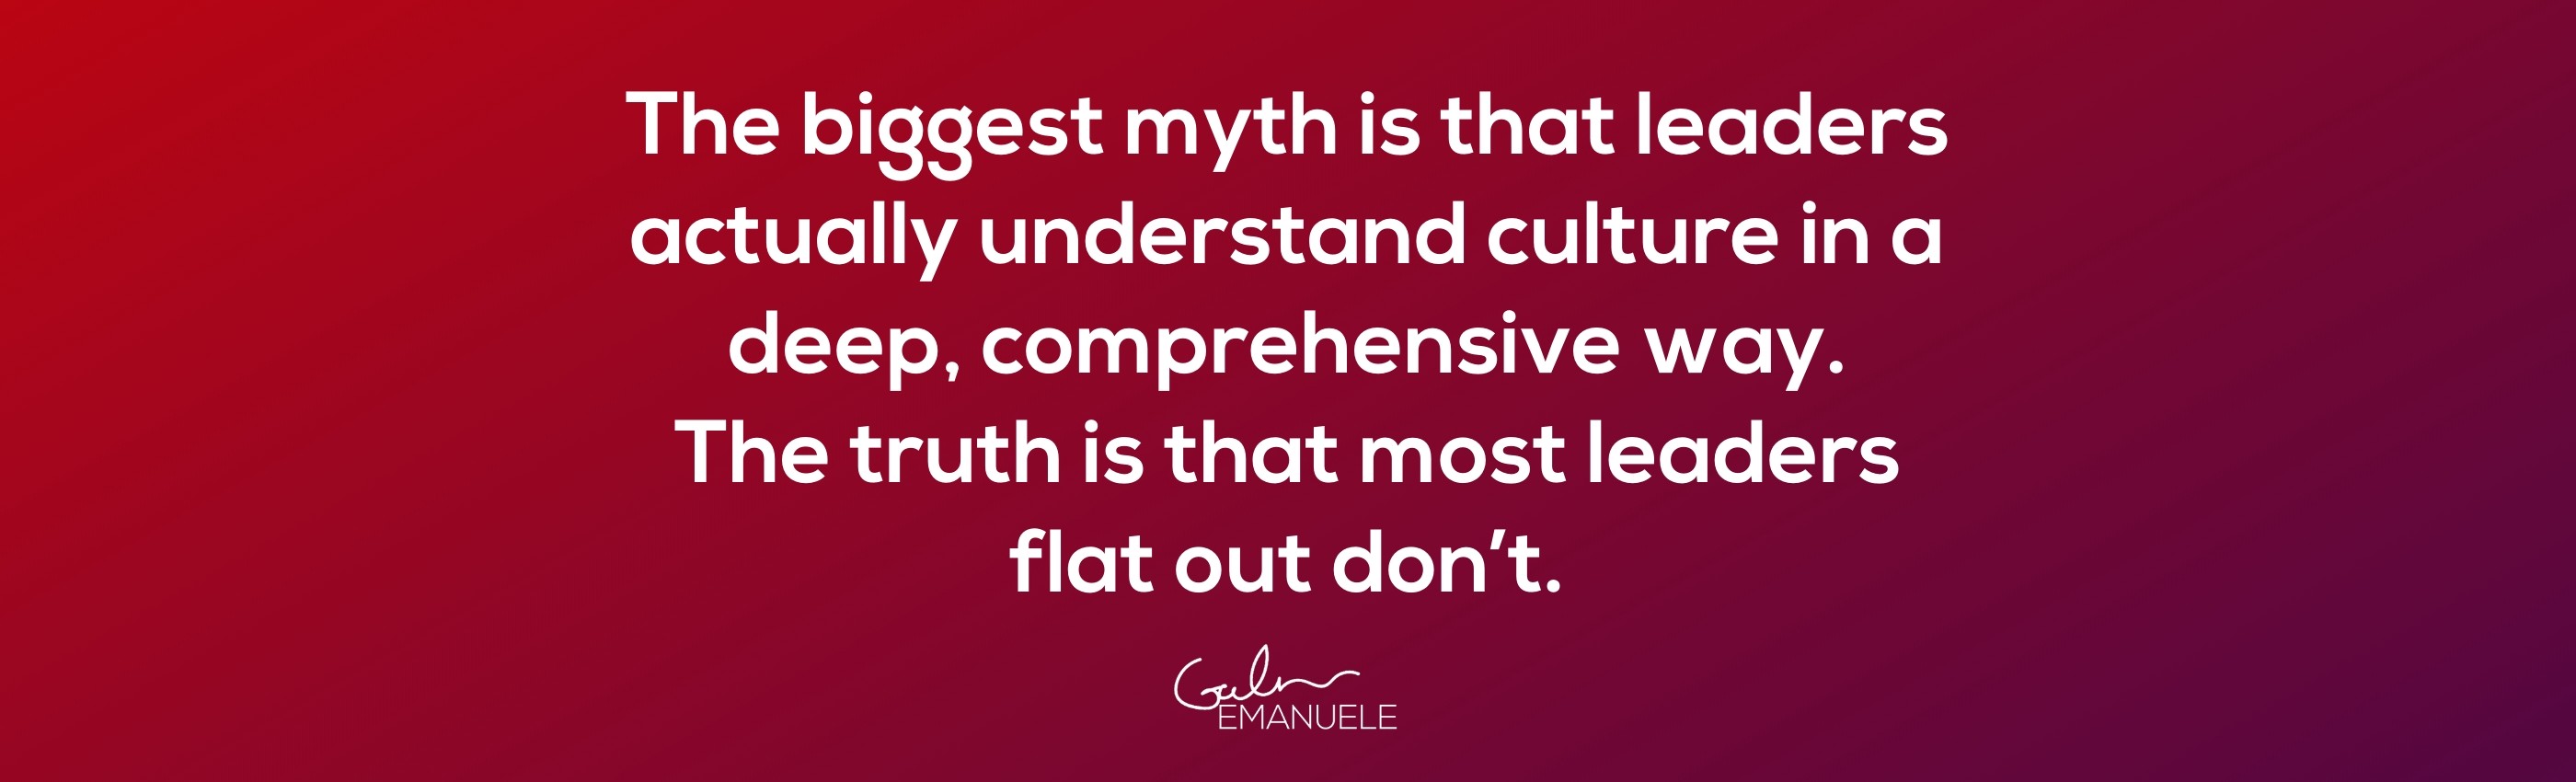 Myth Leaders Understand Culture -Quote Emanuele